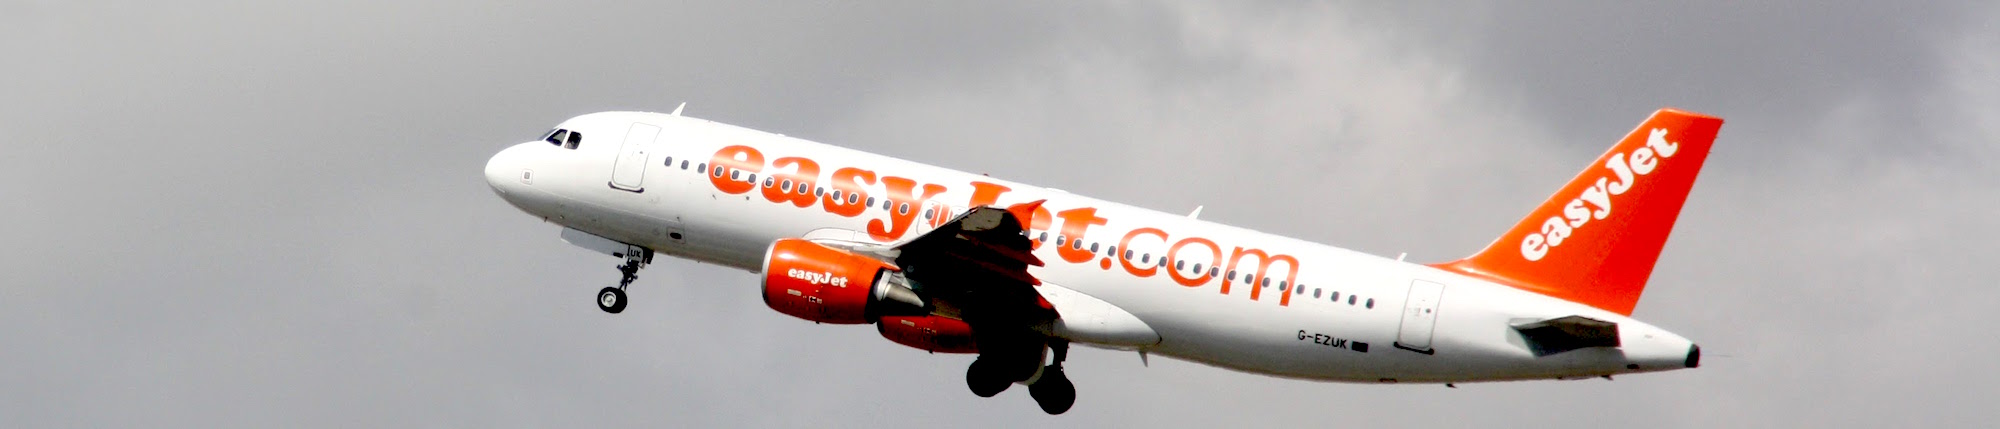 Best time to book flights for London (LTN) to Bordeaux (BOD) flights with EasyJet at AirHint